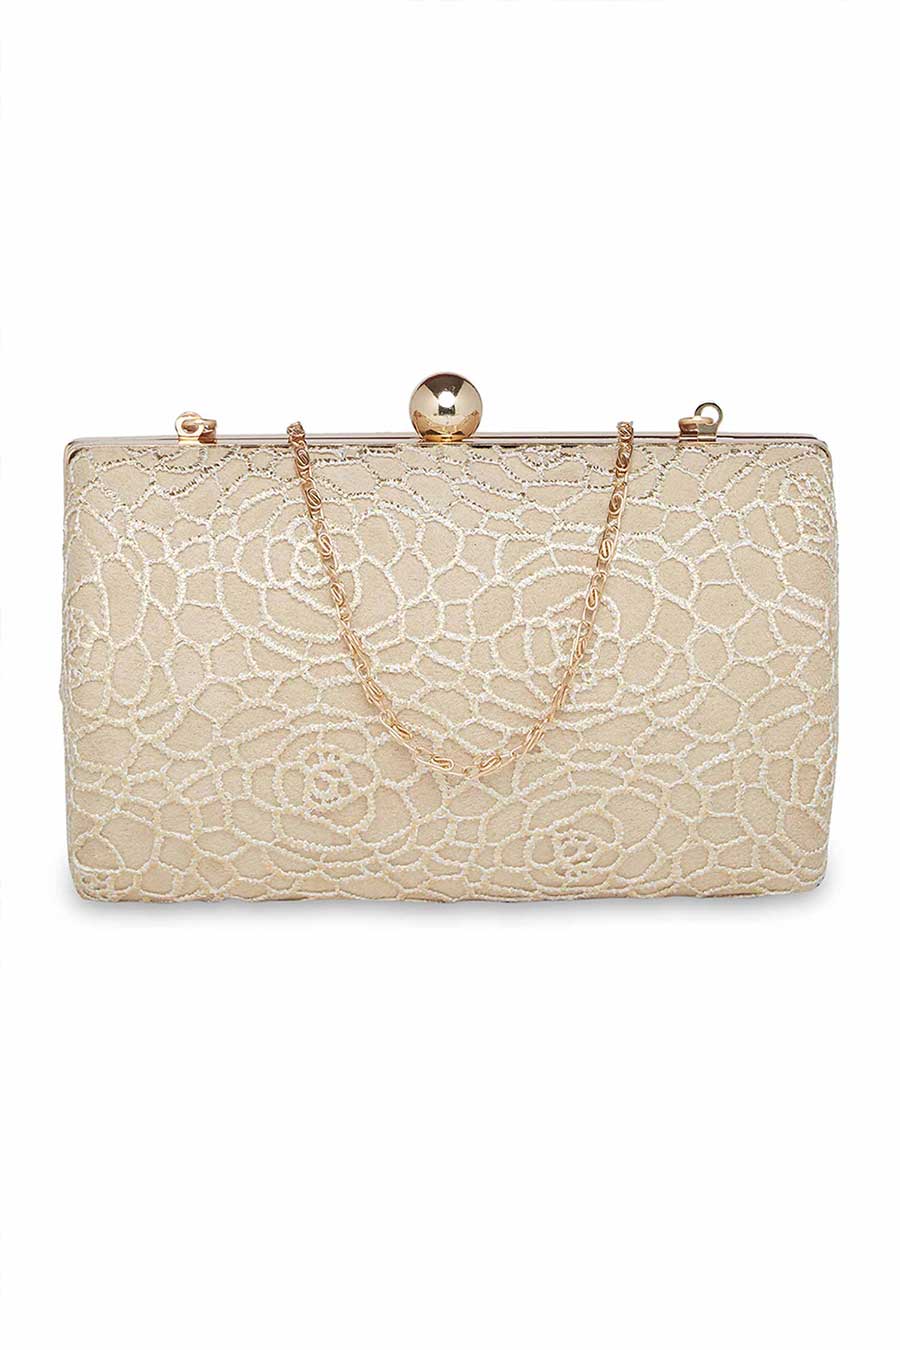 White & Gold Rose Lace Clutch